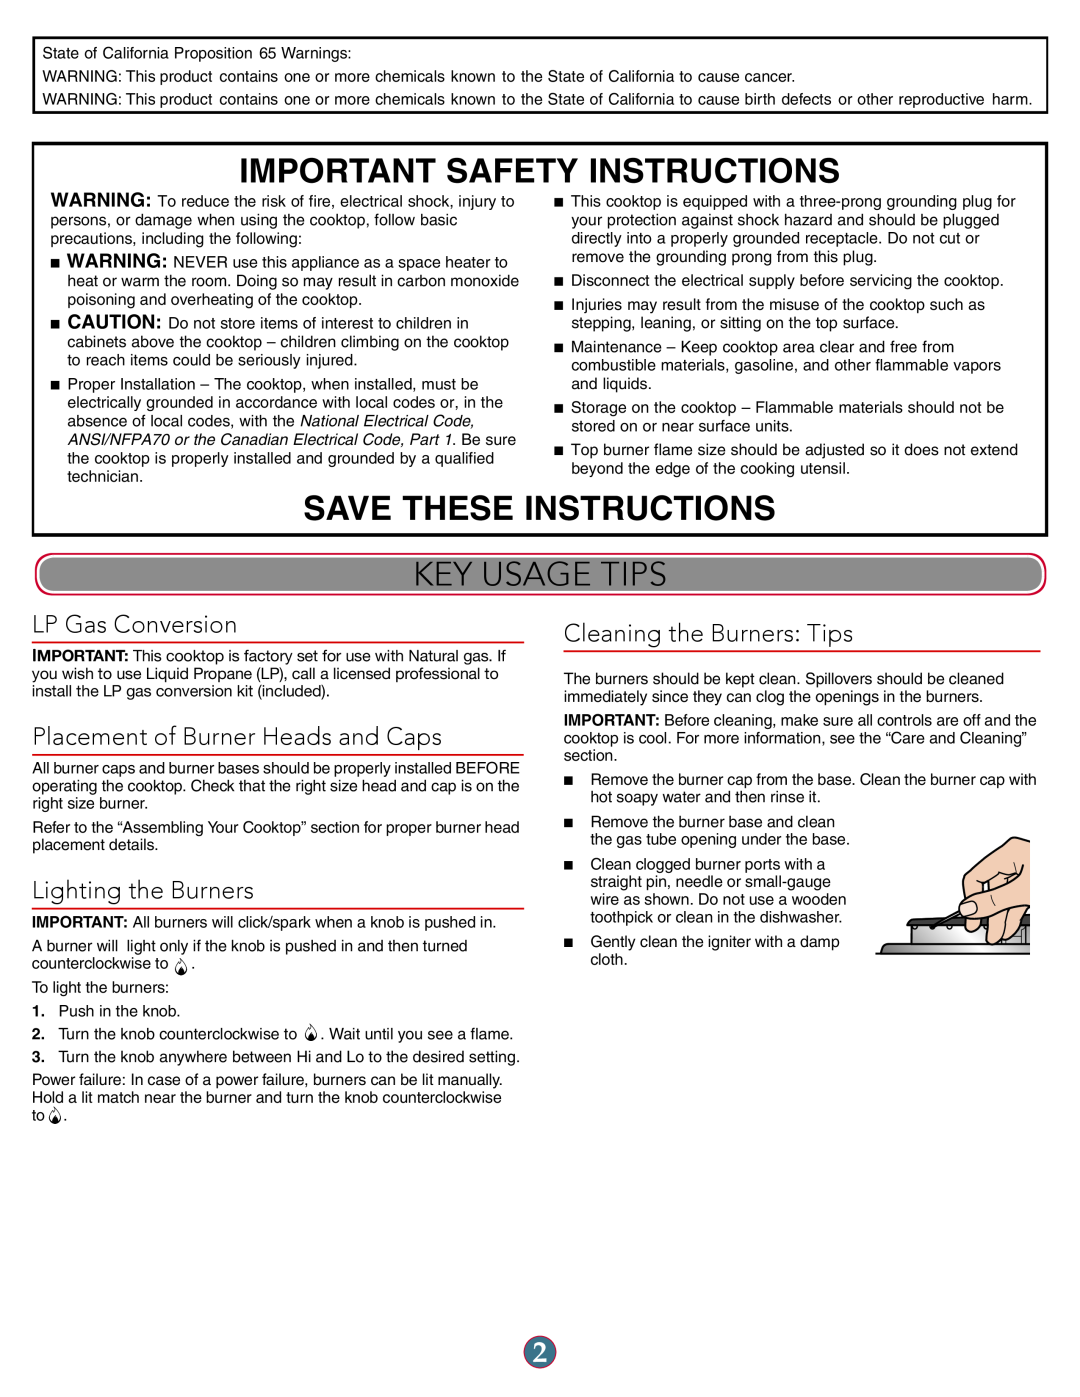 KitchenAid W10597142A manual Important Safety Instructions, Save These Instructions, Key Usage Tips, LP Gas Conversion 